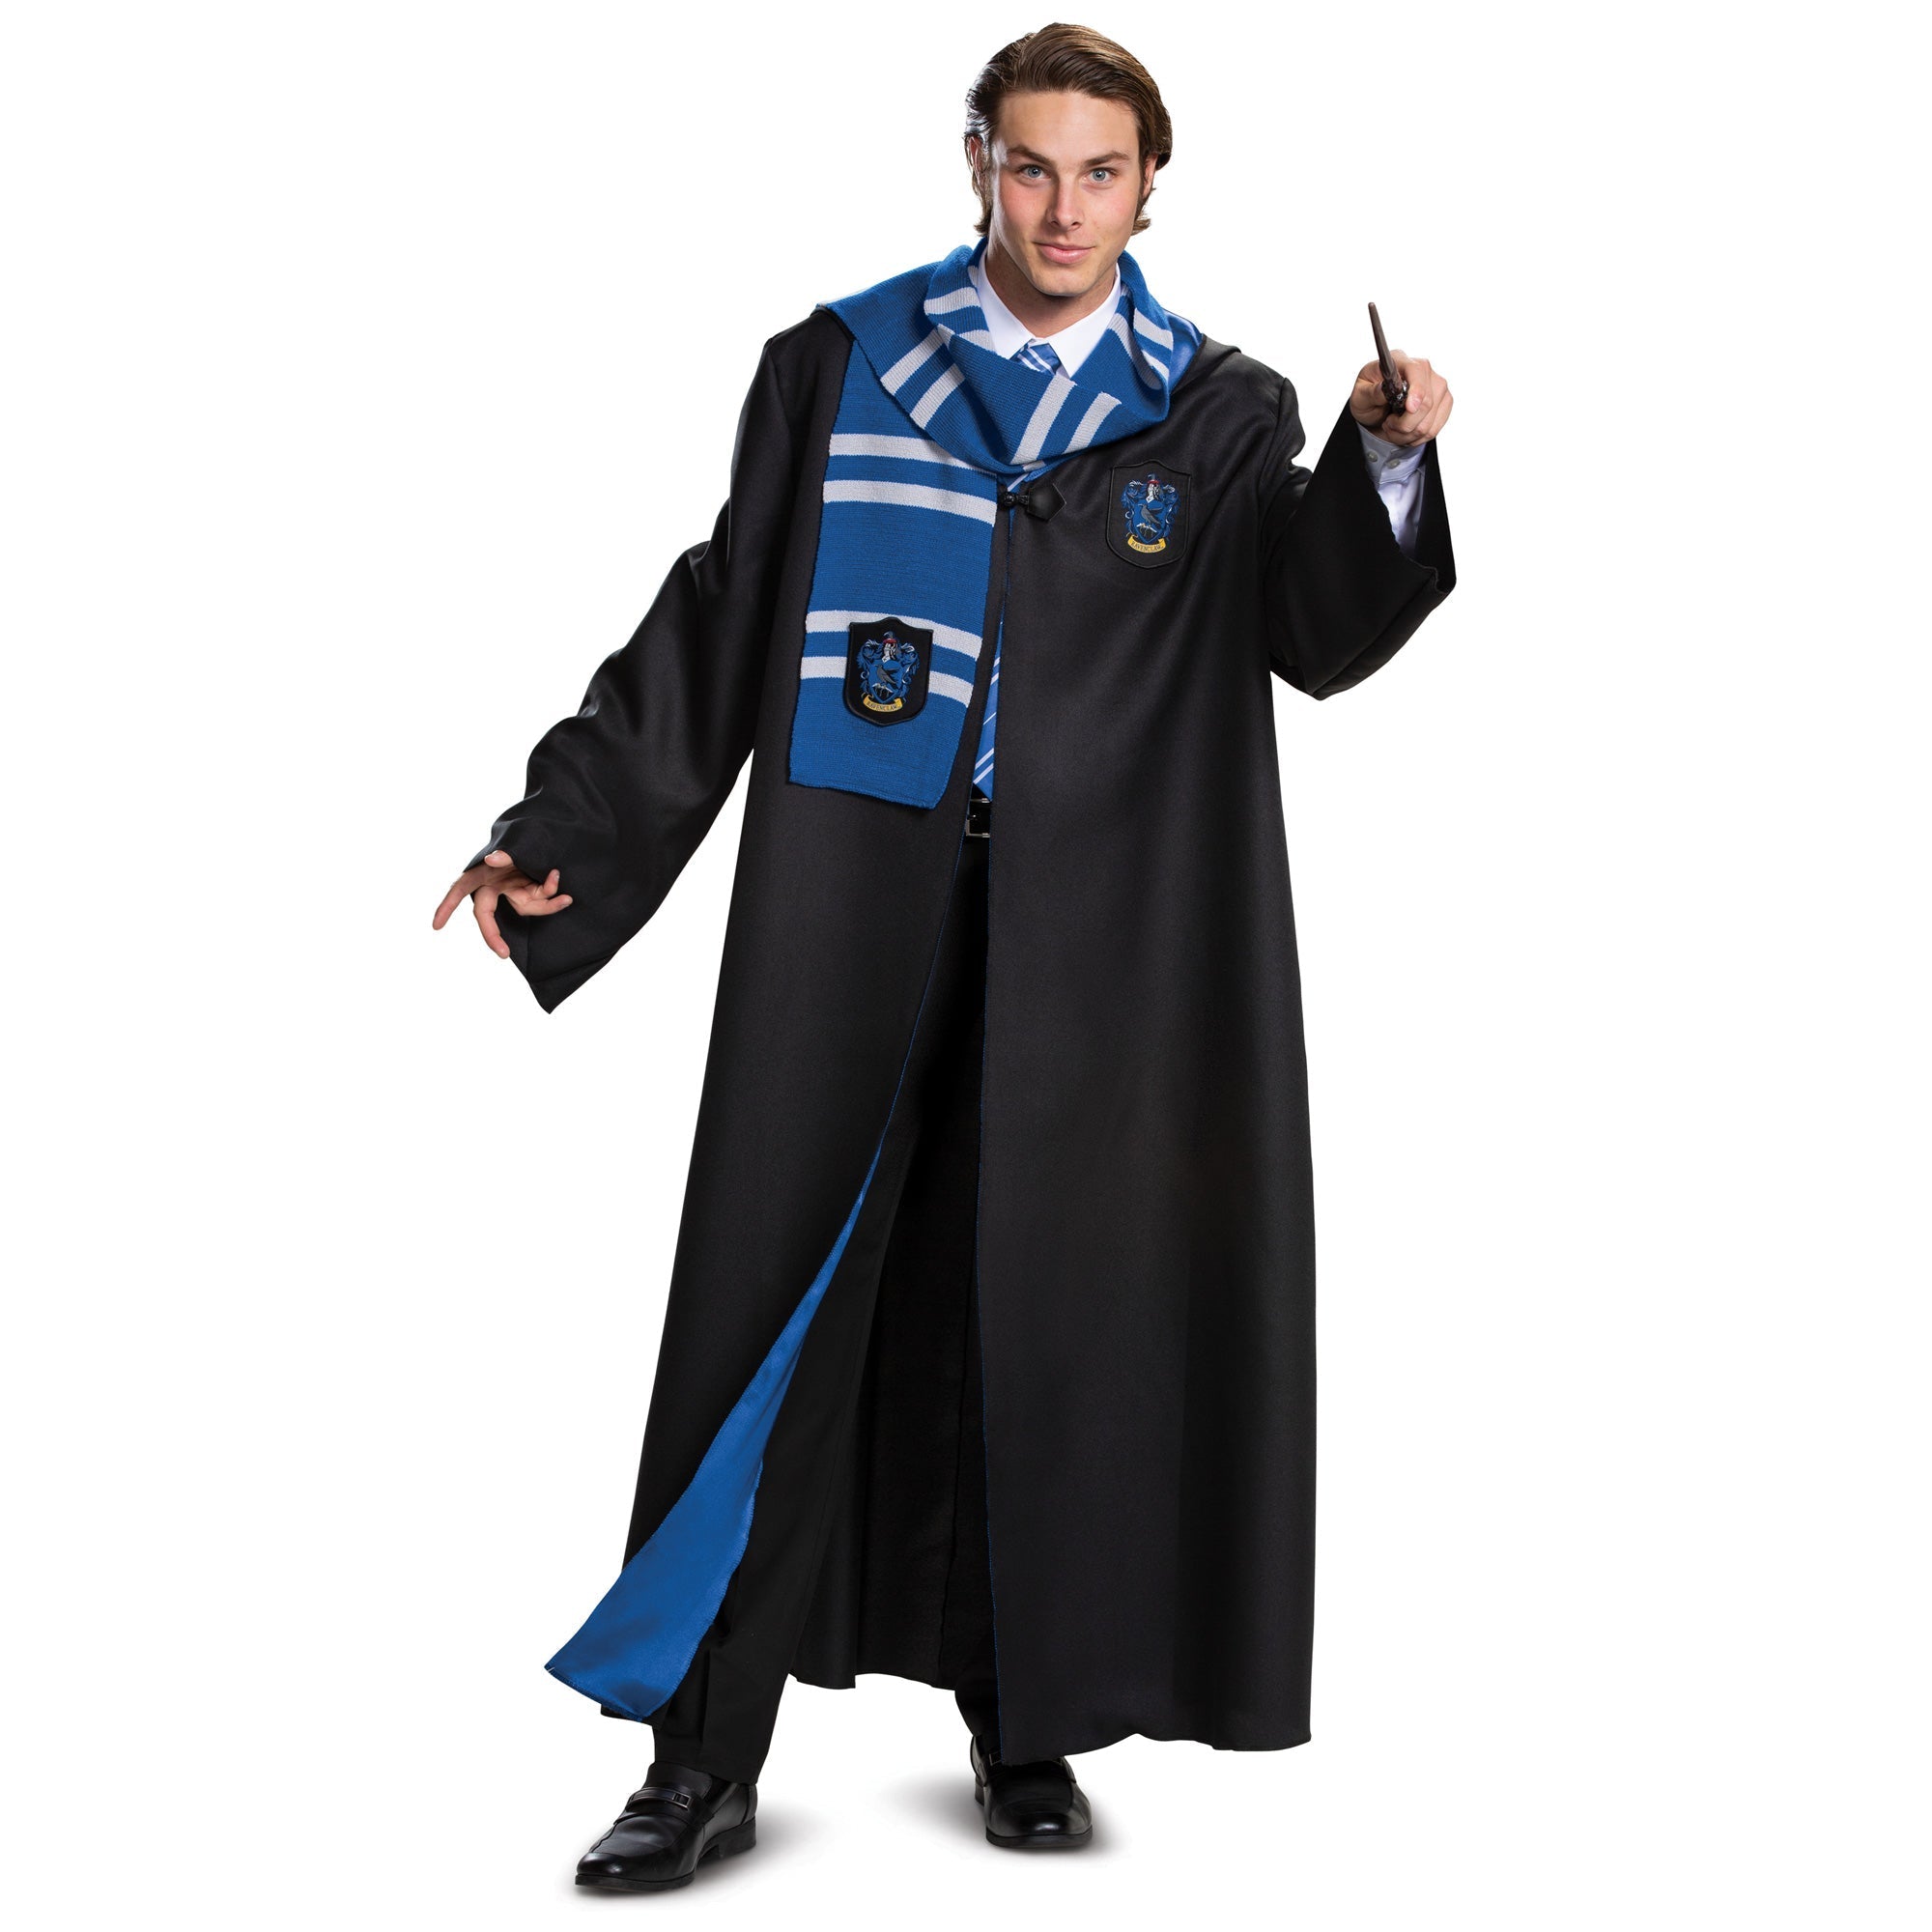 Adult Plus Size Harry Potter Deluxe Ravenclaw Costume Robe